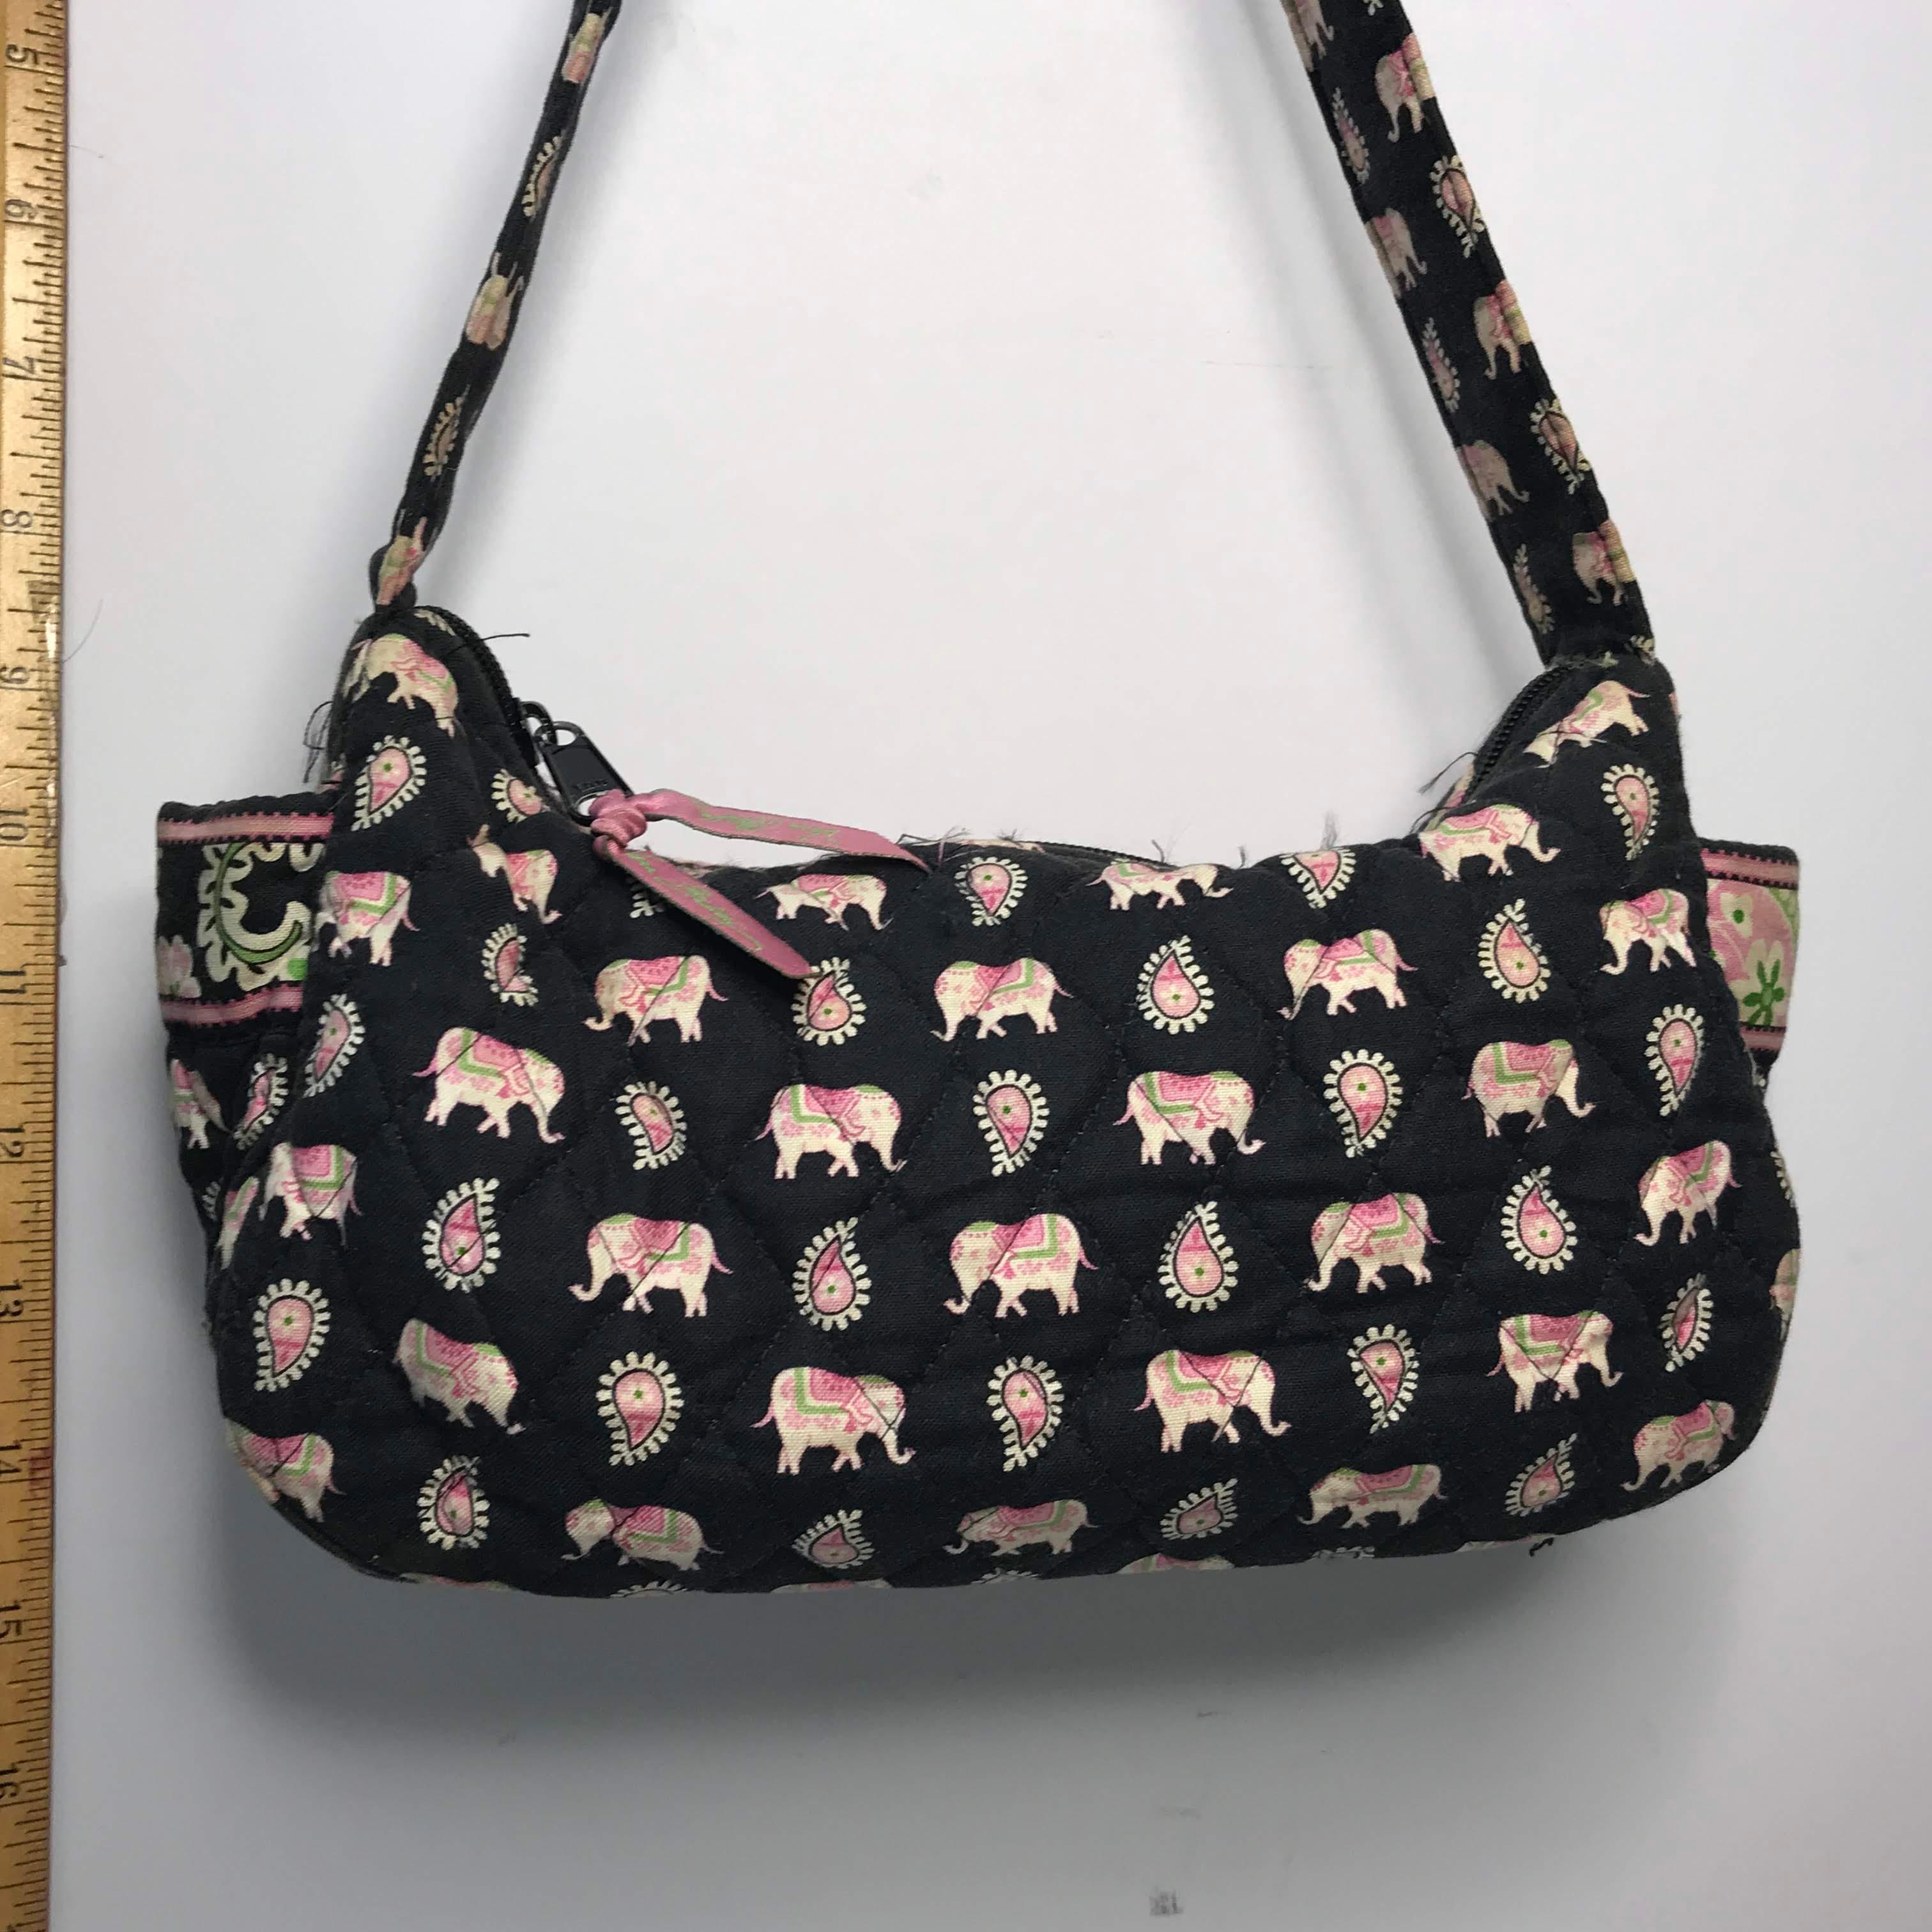 Black Vera Bradley Quilted Purse with Elephant Design & ID Wallet